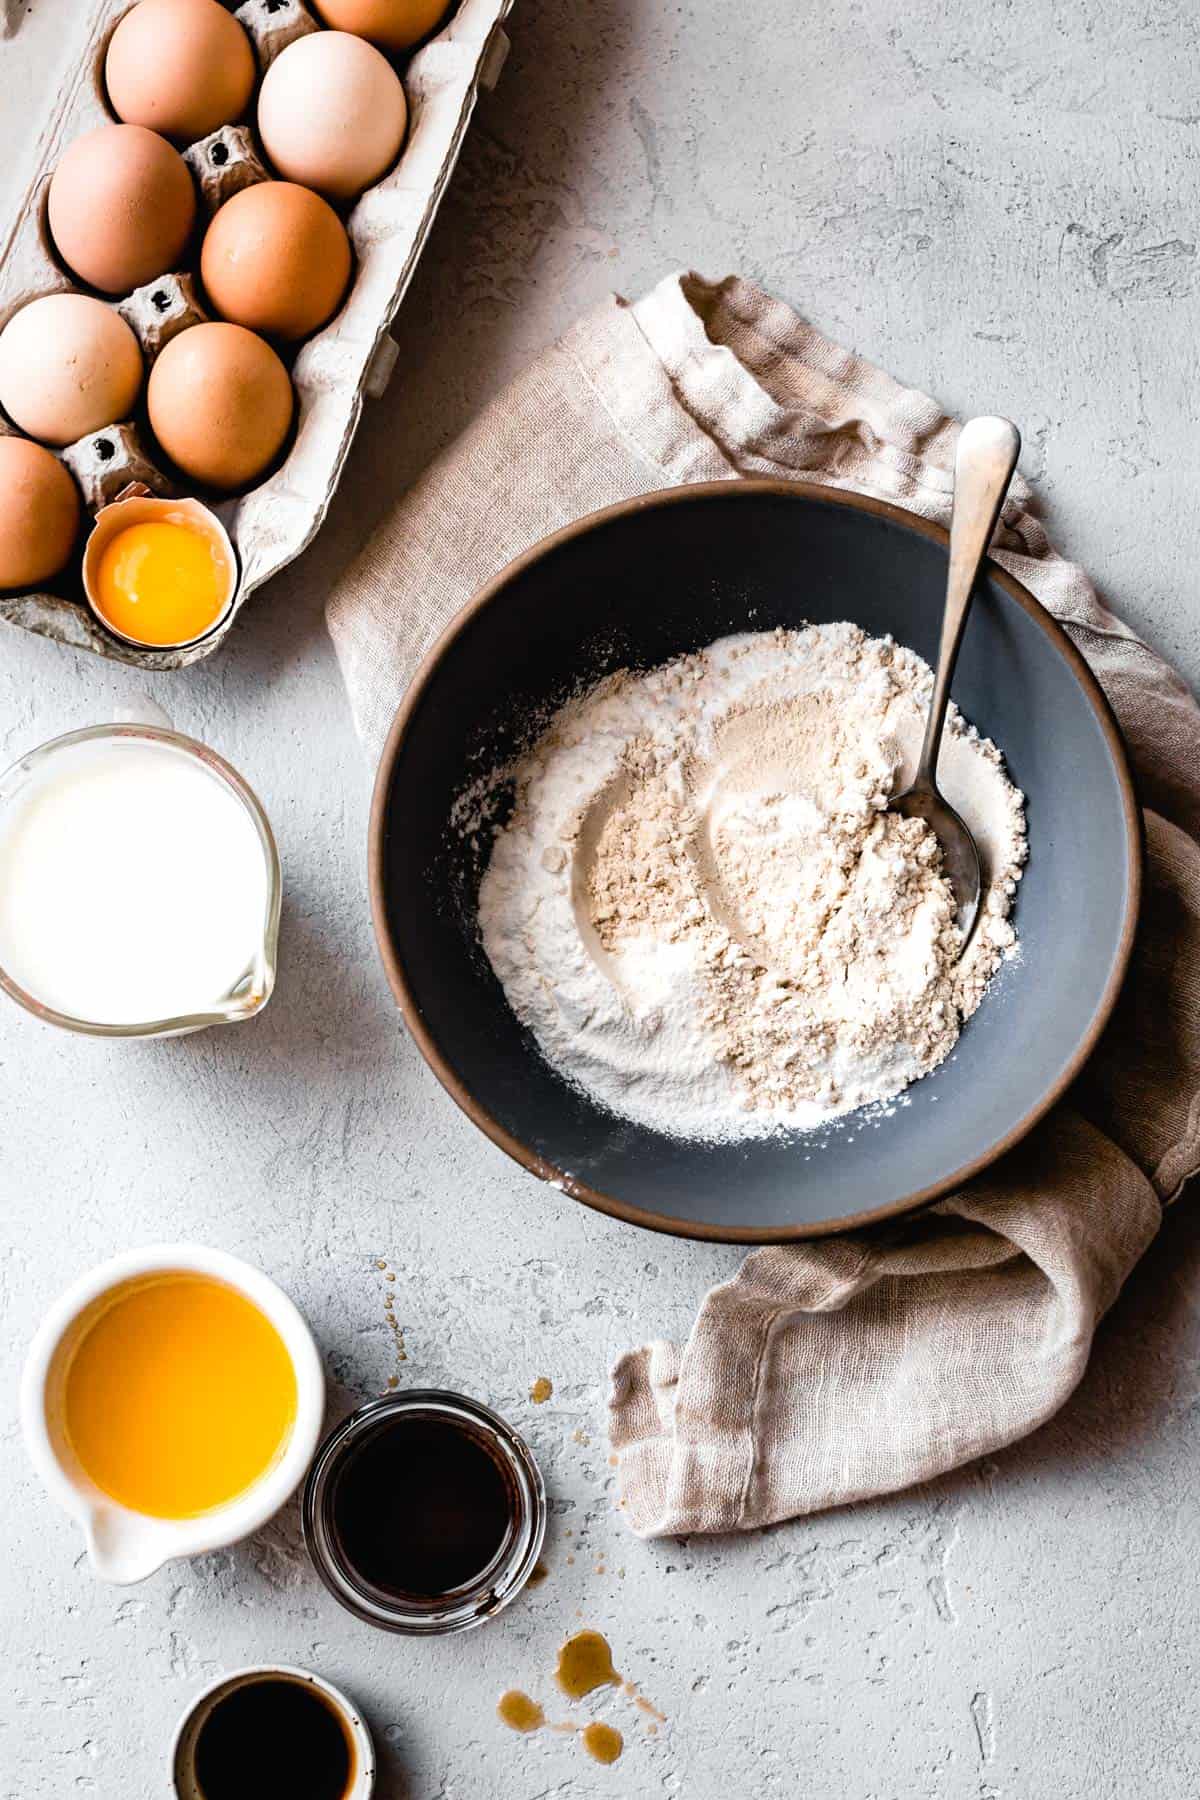 Ingredients and flours for gluten free pancakes are arranged on a gray plaster surface